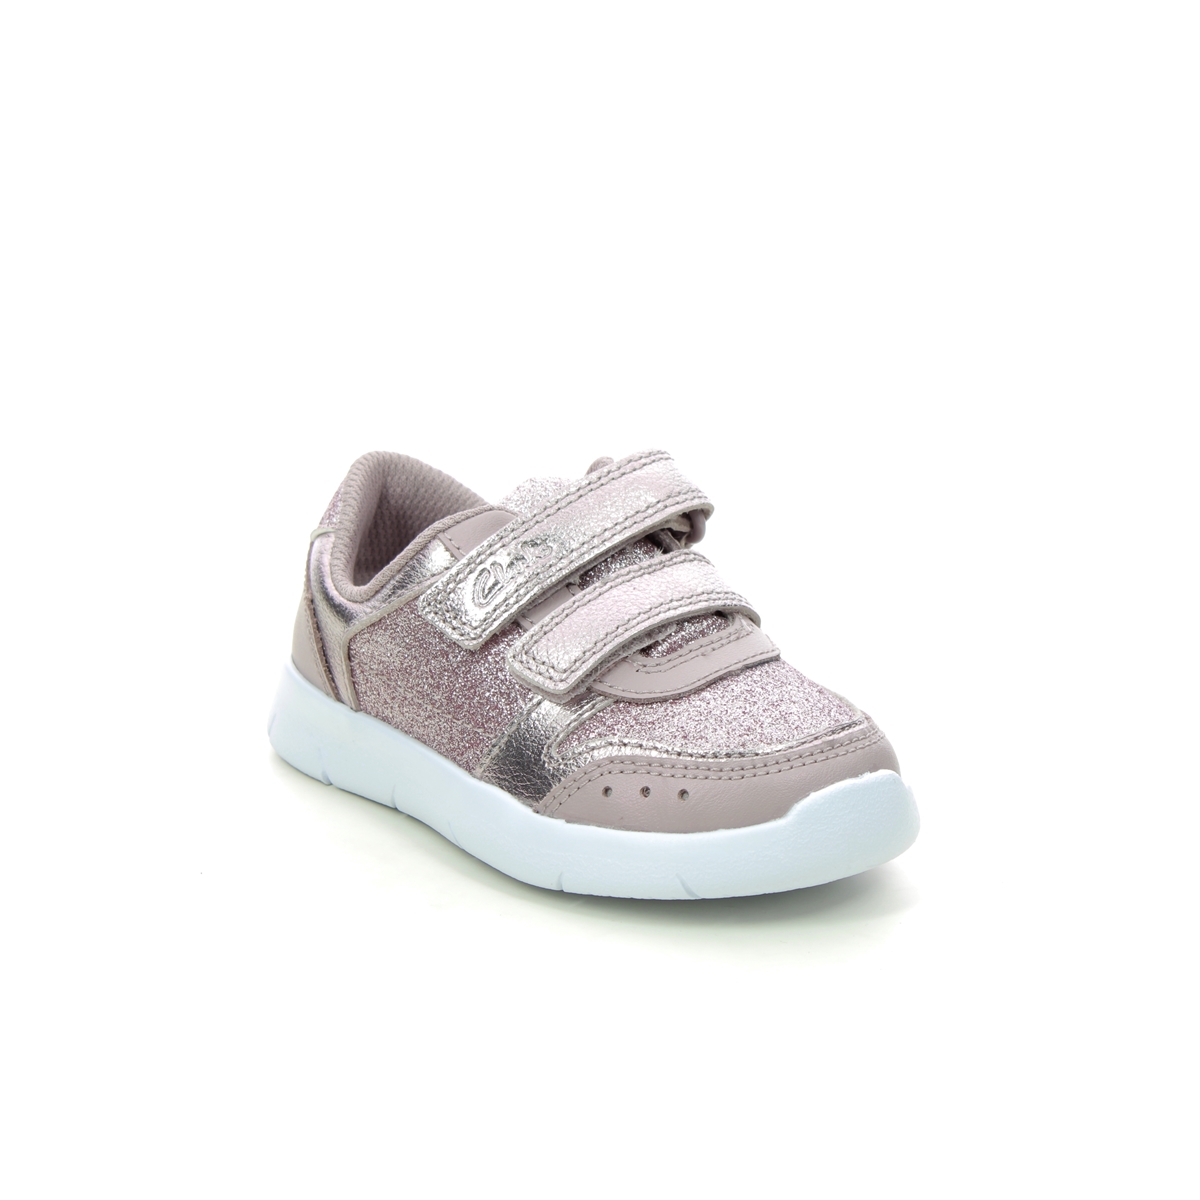 Clarks Ath Sonar T Pink Kids Toddler Girls Trainers 683726F In Size 4.5 In Plain Pink F Width Fitting Regular Fit For kids